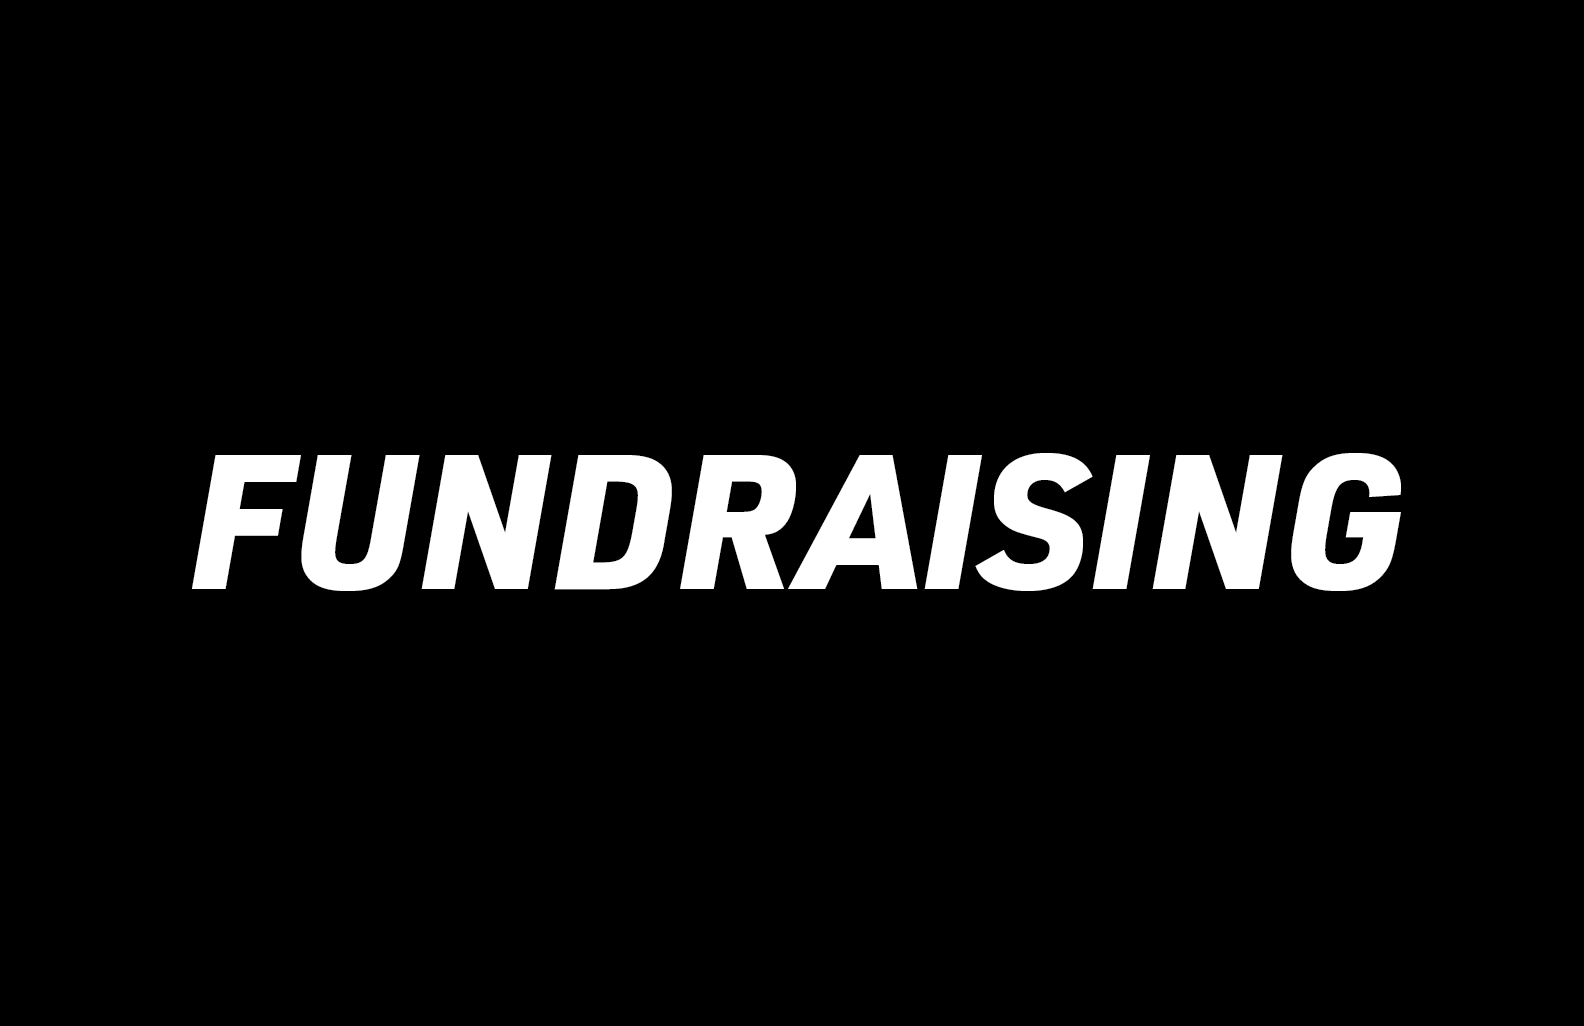 Fundraising-01.png